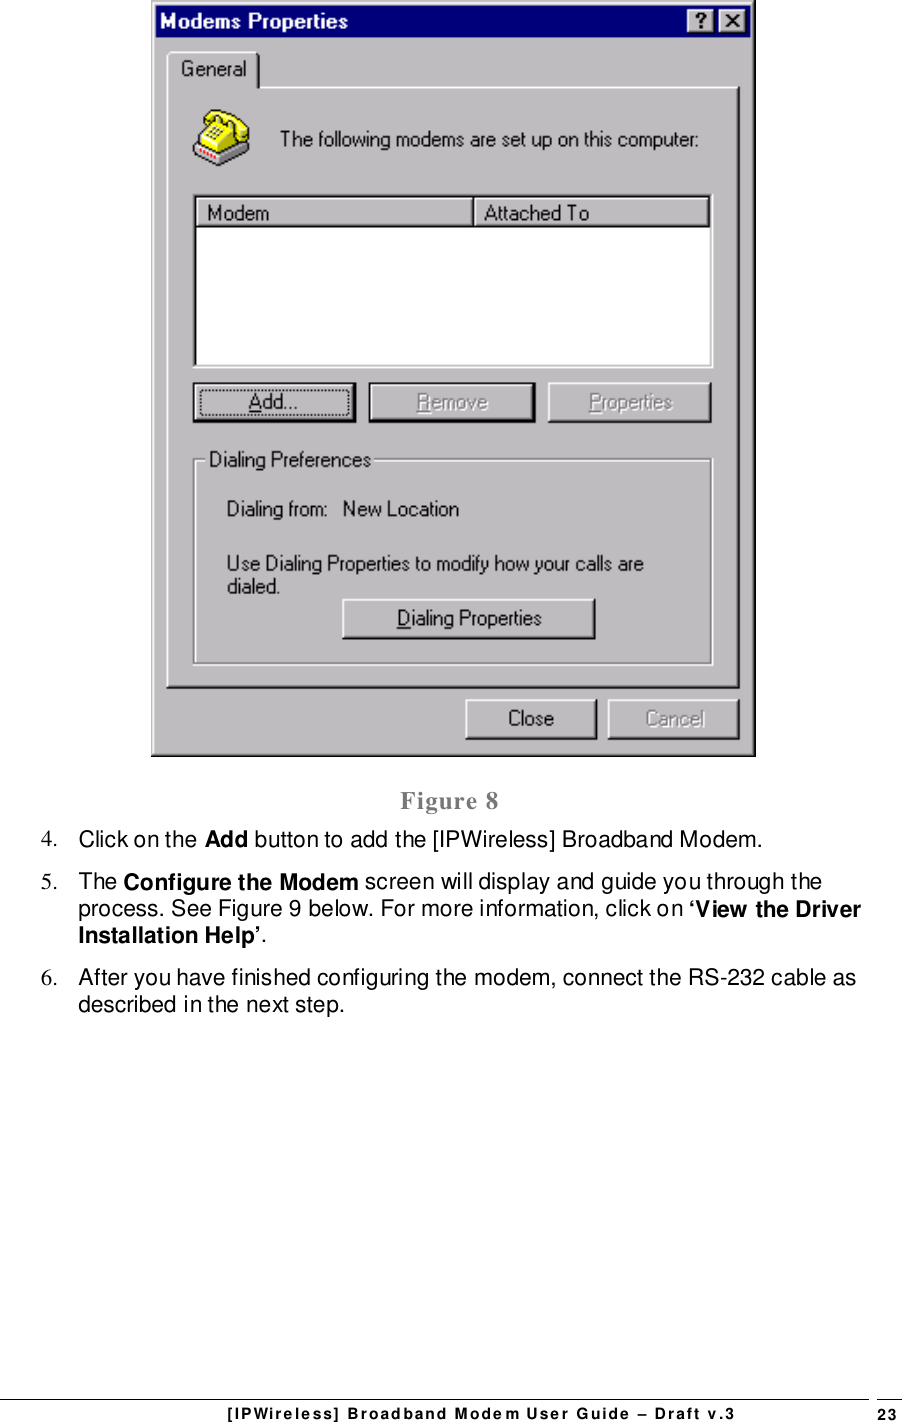 [IPWireless] Broadband Modem User Guide – Draft v.3 23Figure 84.  Click on the Add button to add the [IPWireless] Broadband Modem.5. The Configure the Modem screen will display and guide you through theprocess. See Figure 9 below. For more information, click on ‘View the DriverInstallation Help’.6.  After you have finished configuring the modem, connect the RS-232 cable asdescribed in the next step.